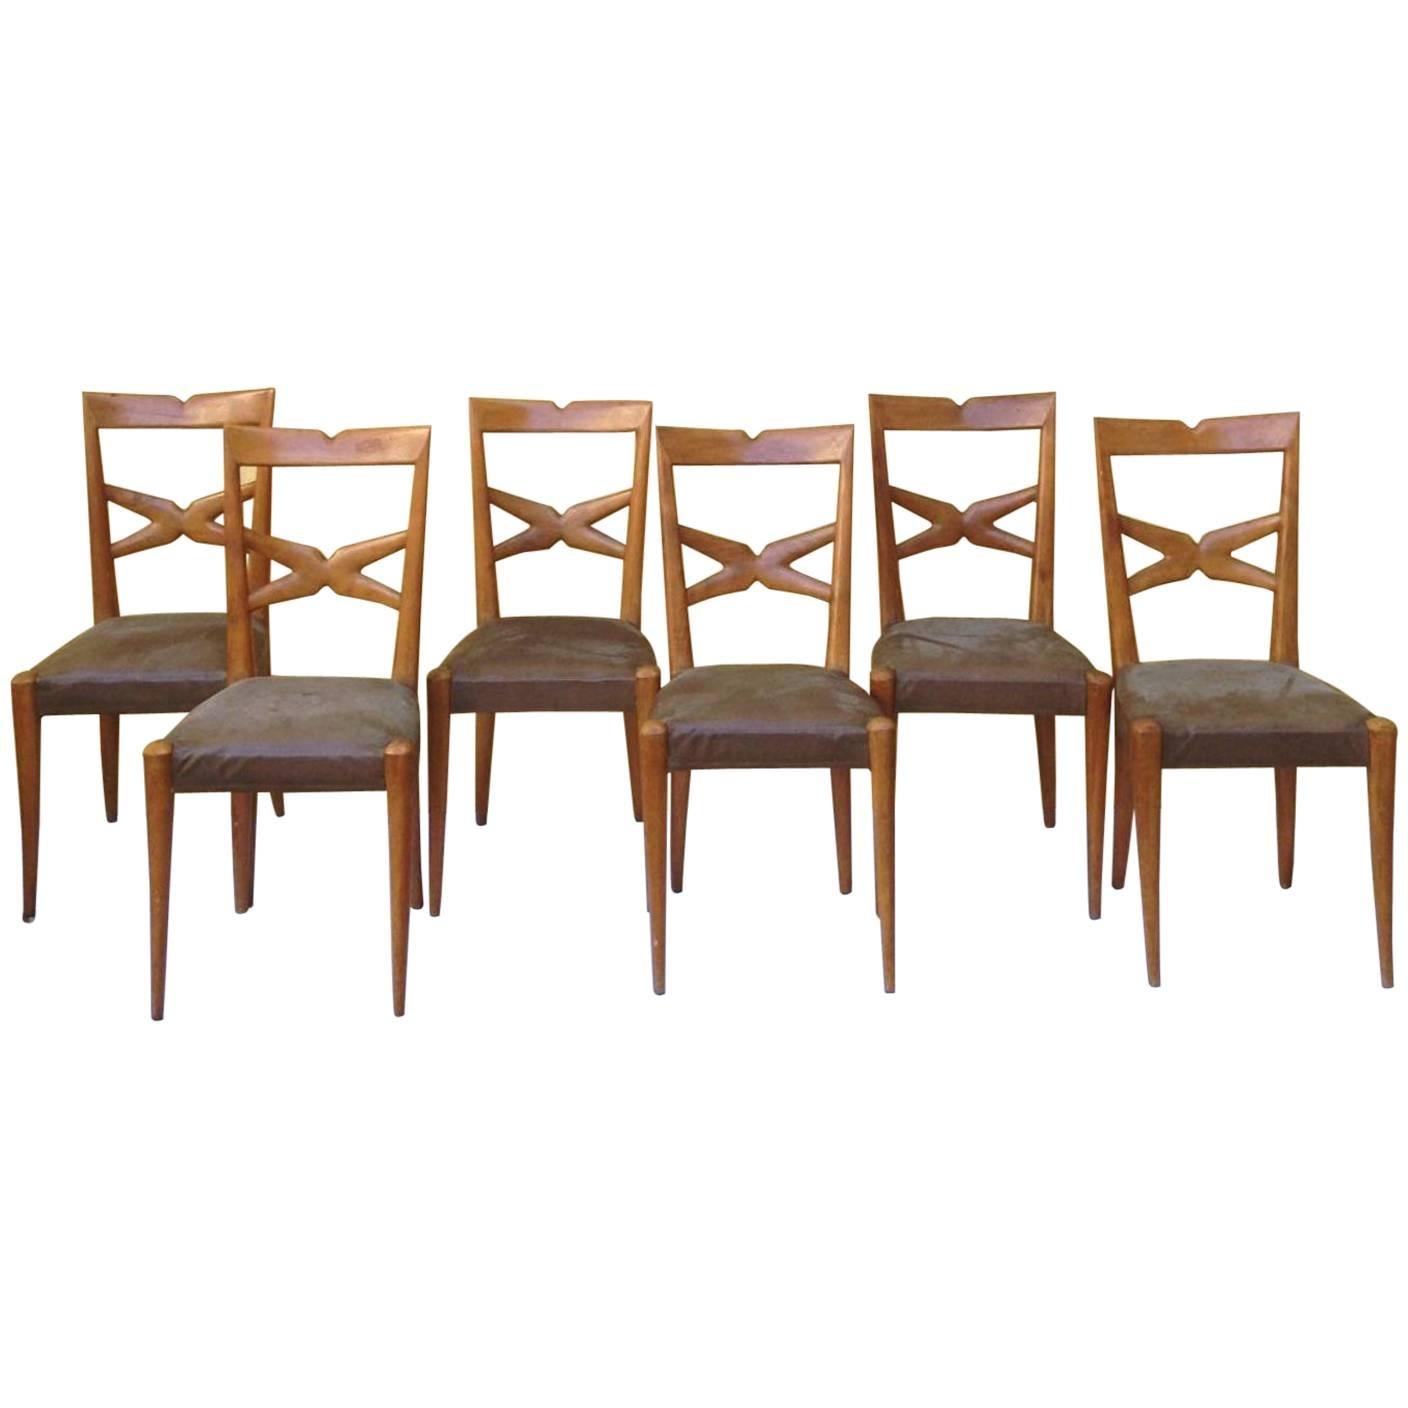 1940s Set of Six Chairs Attributed to Atelier Borsani For Sale